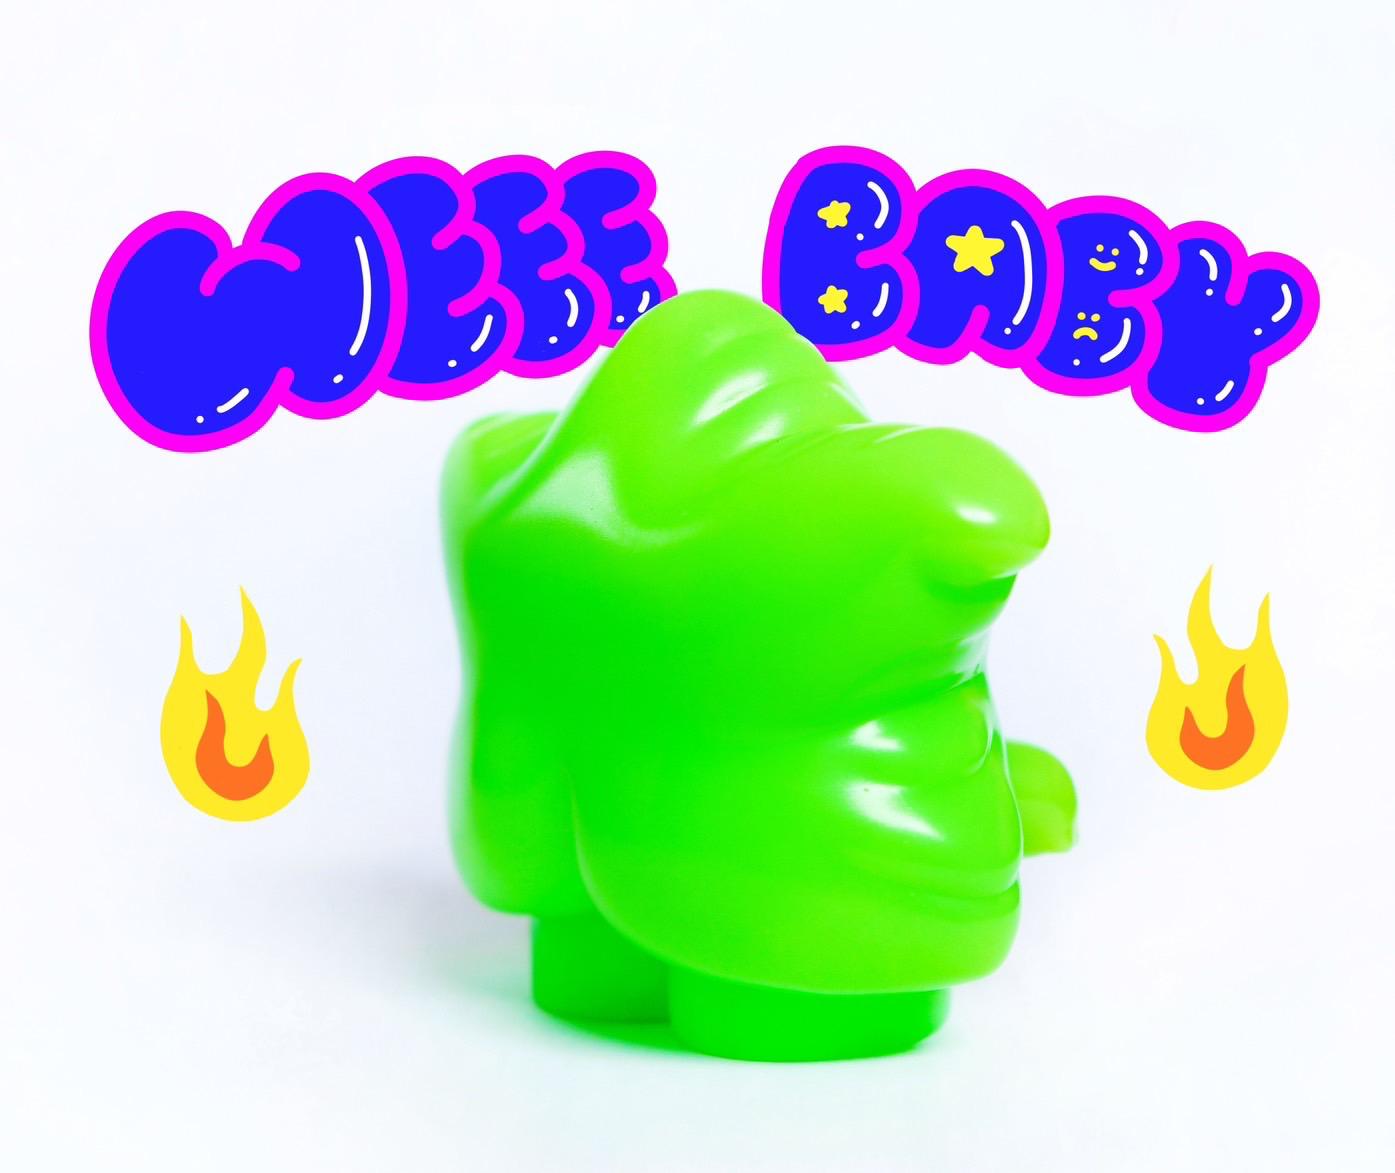 Cartoon toy with text overlay, green plastic object with blue and pink letters, yellow and orange flame.